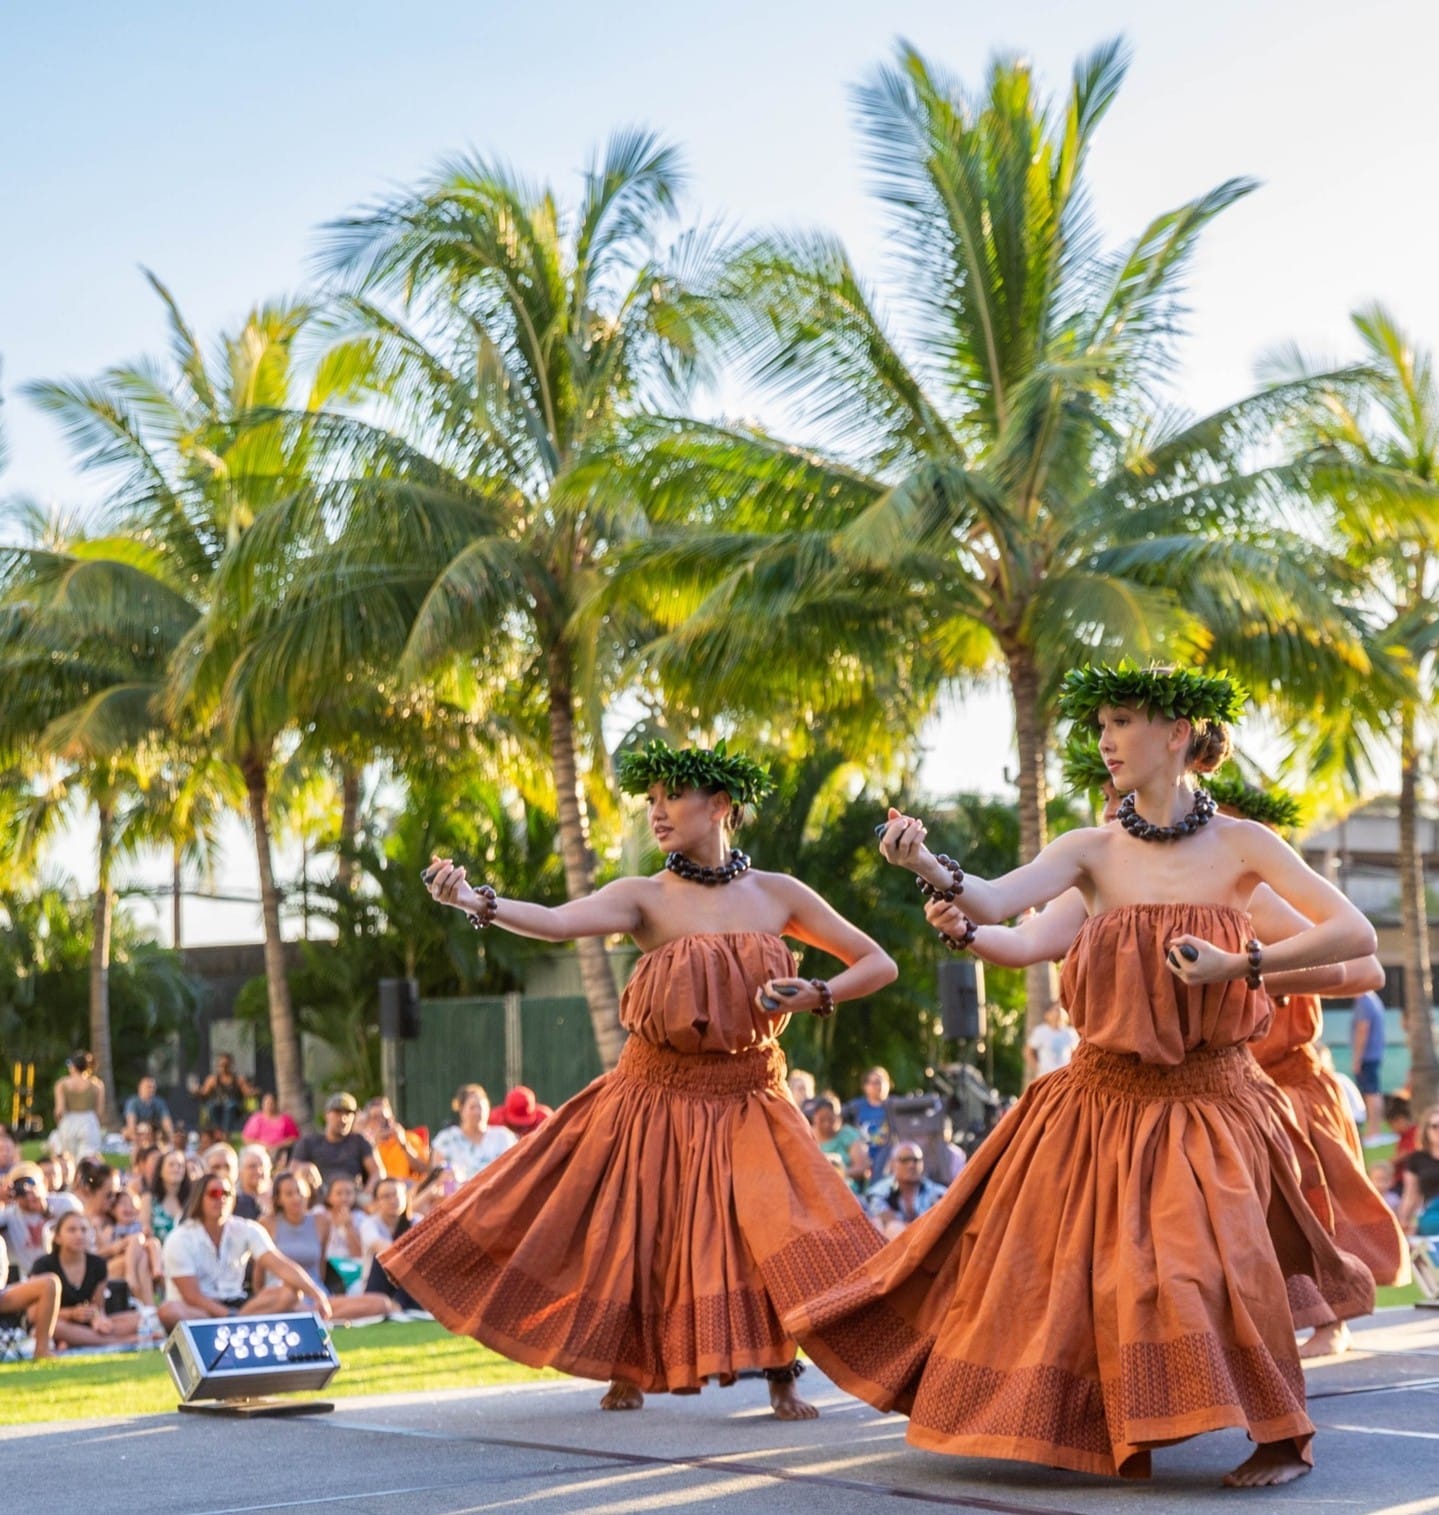 Join us for Kona Nui Nights on Wednesday, August 9 from 6pm - 8pm at Victoria Ward Park. Enjoy an evening under the palms with live music by Kainani Kahaunaele and a celebration of hula and storytelling by Hālau ʻIlima Kū Kahakai, Kumu Kēhaulani Enos. Learn more at the link in our bio.